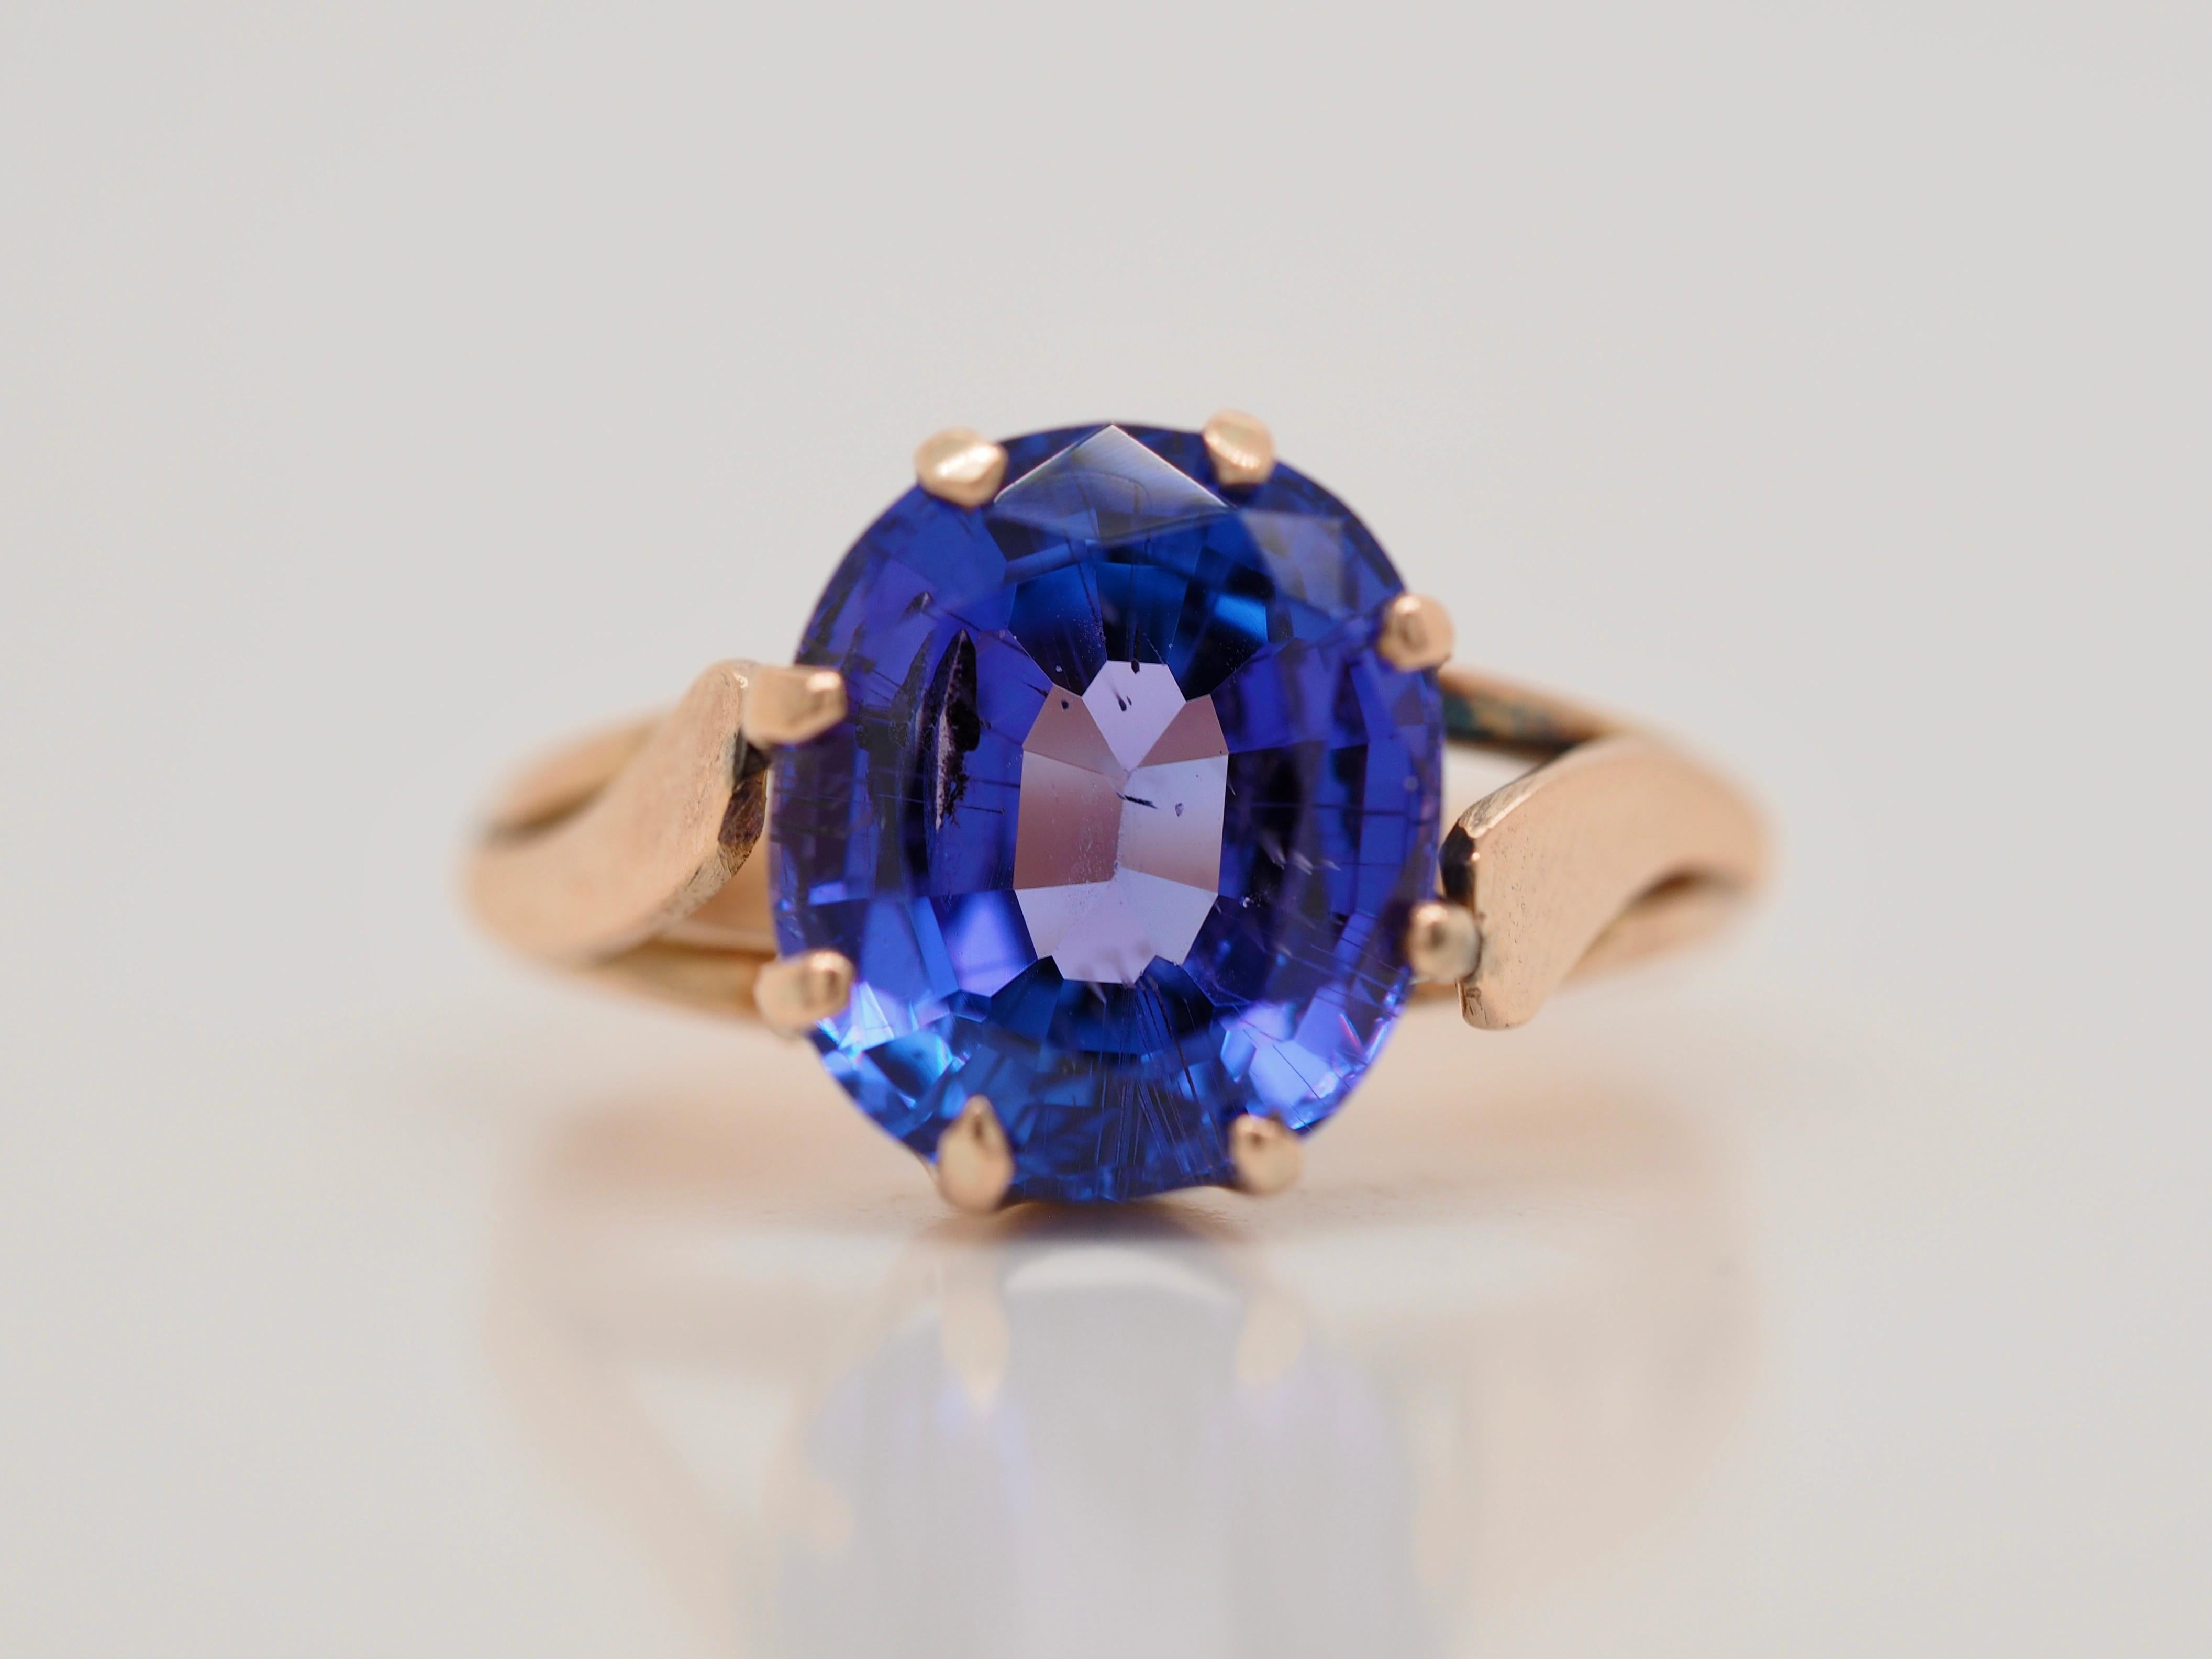 Oval Cut Vintage Tanzanite Solitaire Vintage Ring in 14 Karat Yellow Gold